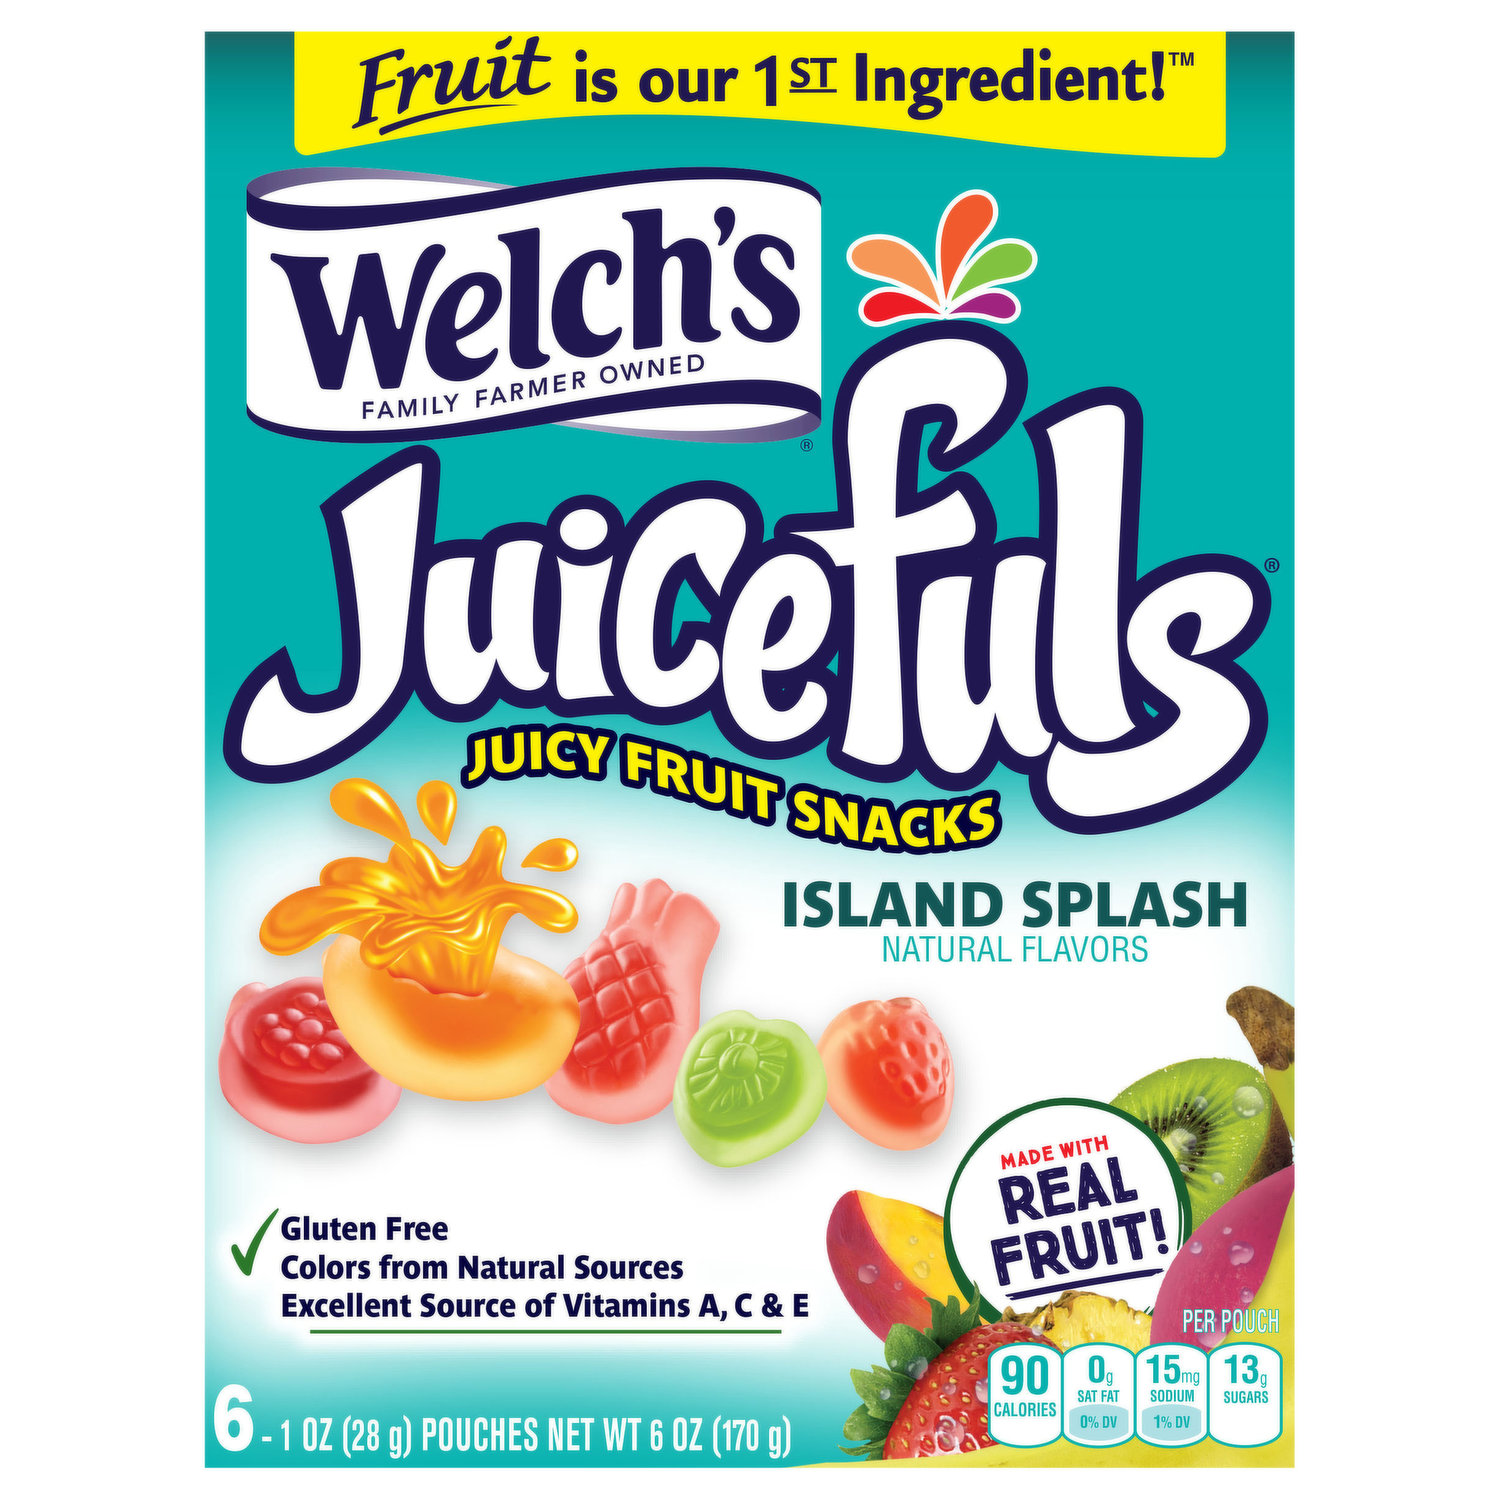 Welch's Fruit Snacks Tray, 20 ct.